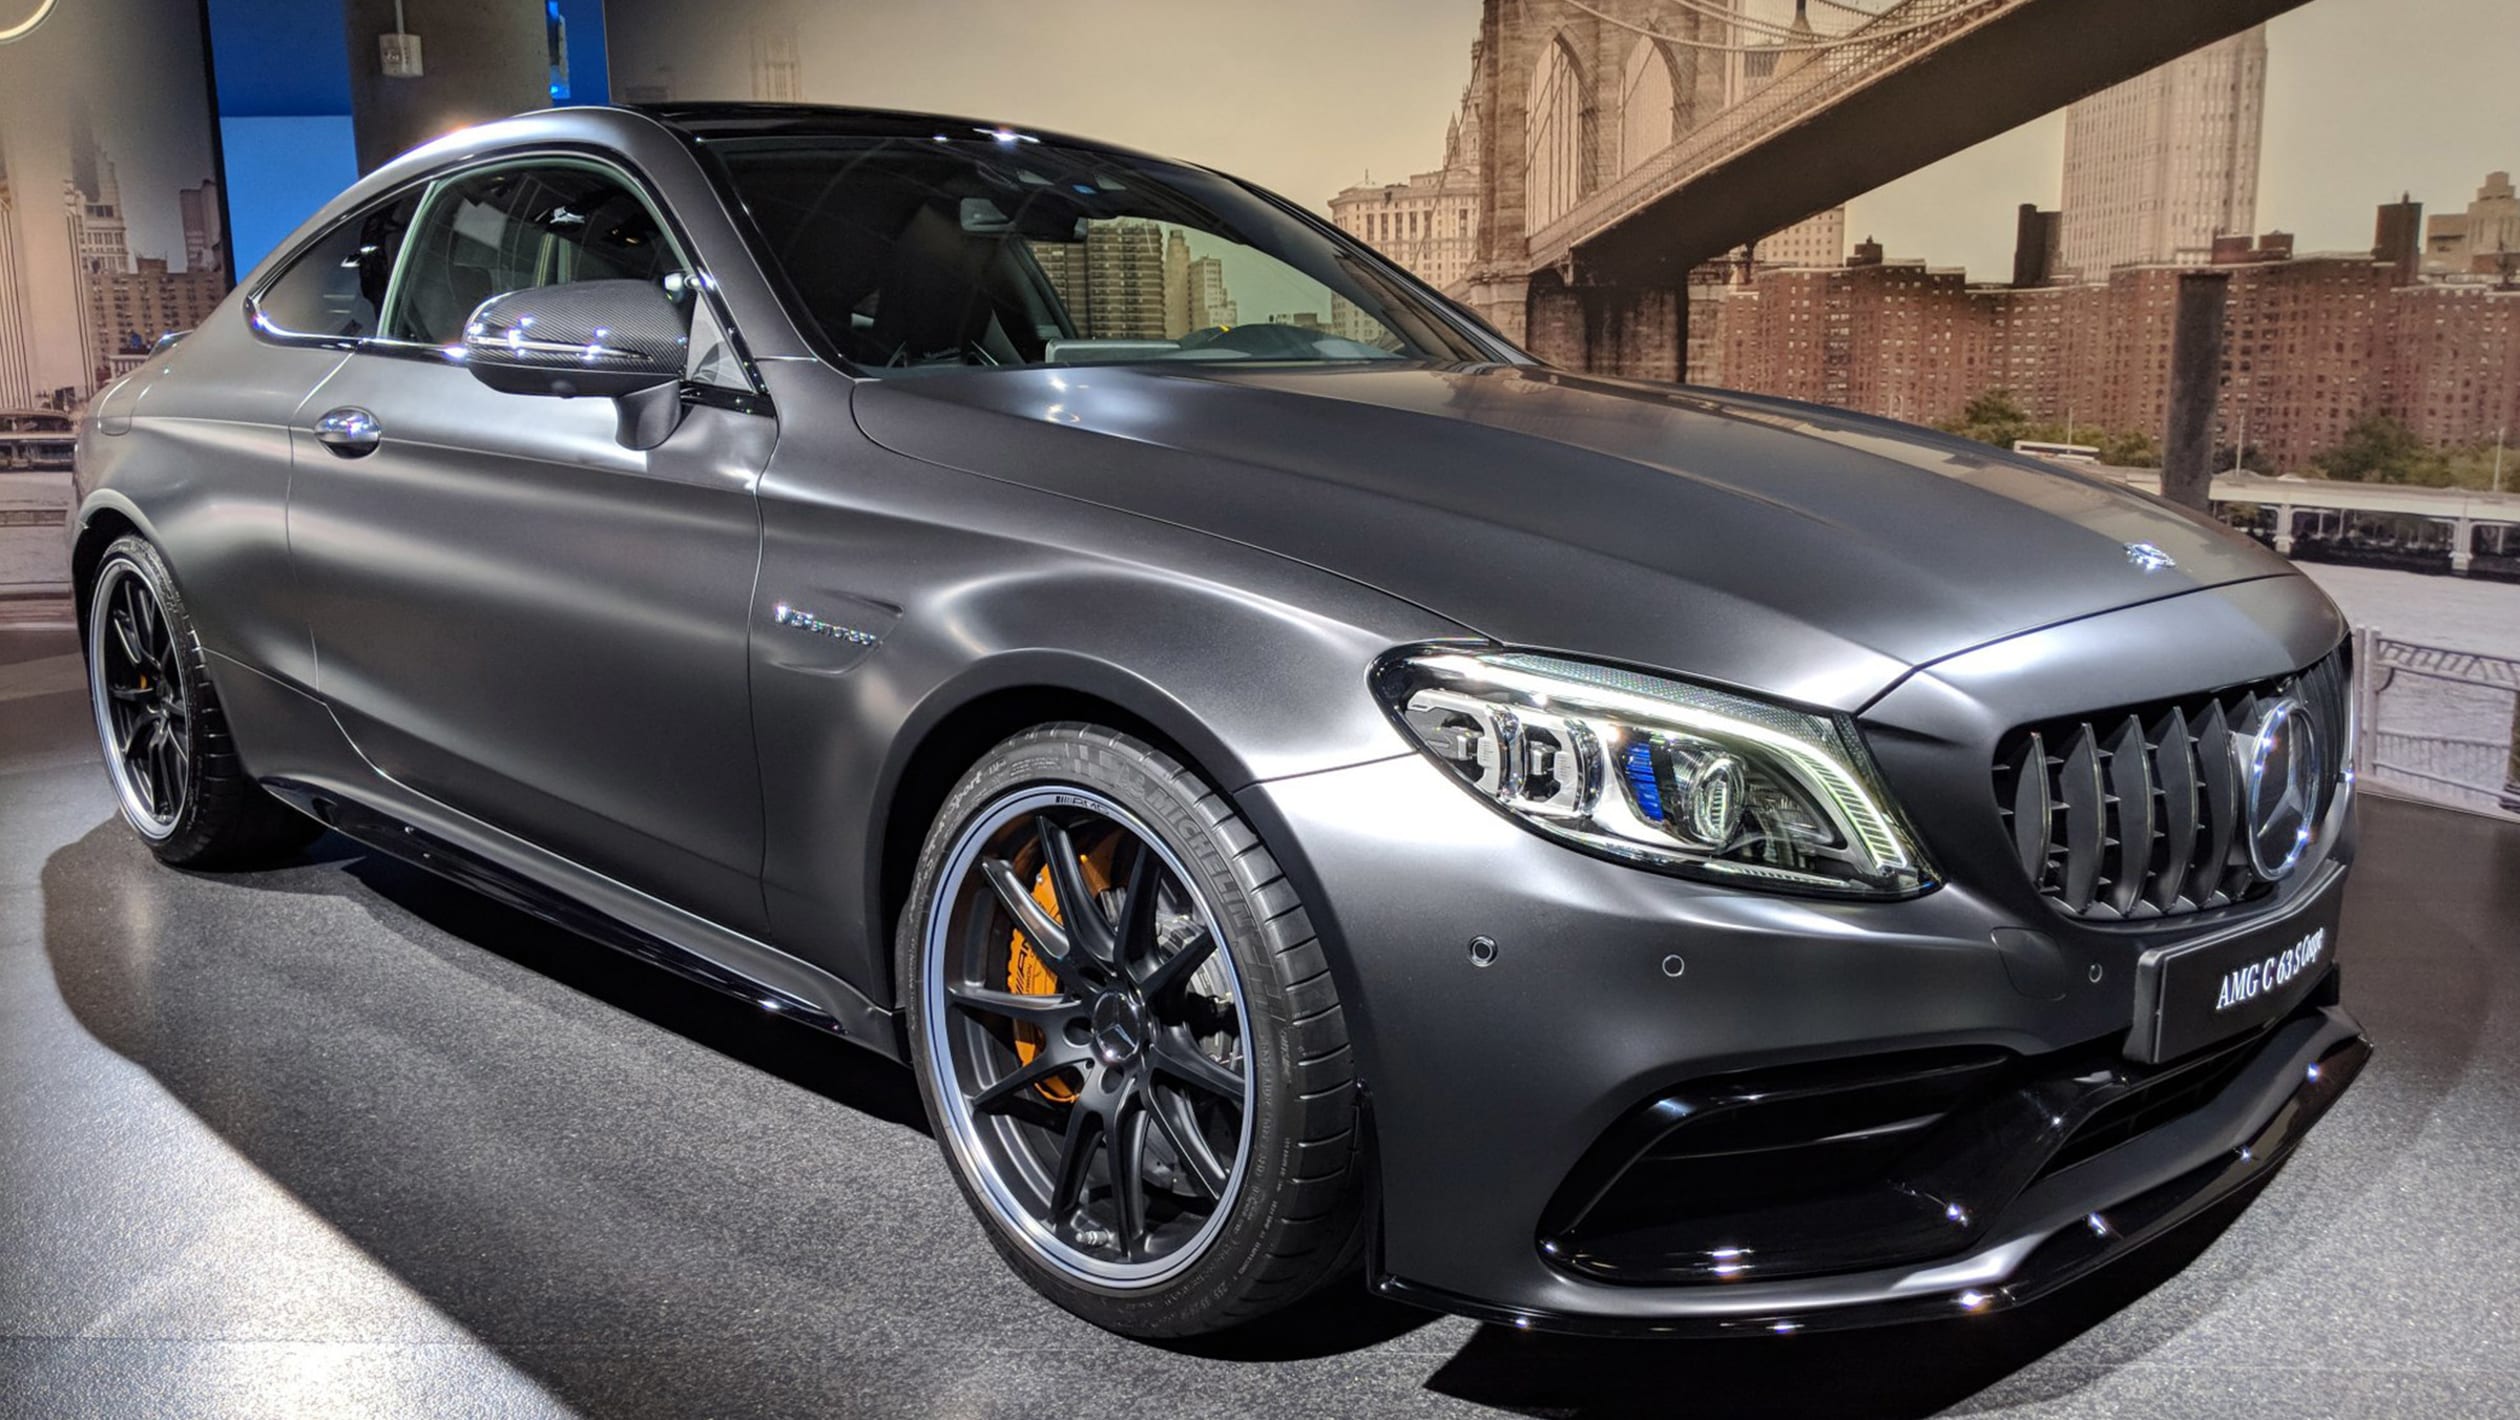 New facelifted MercedesAMG C 63 revealed pictures Auto Express